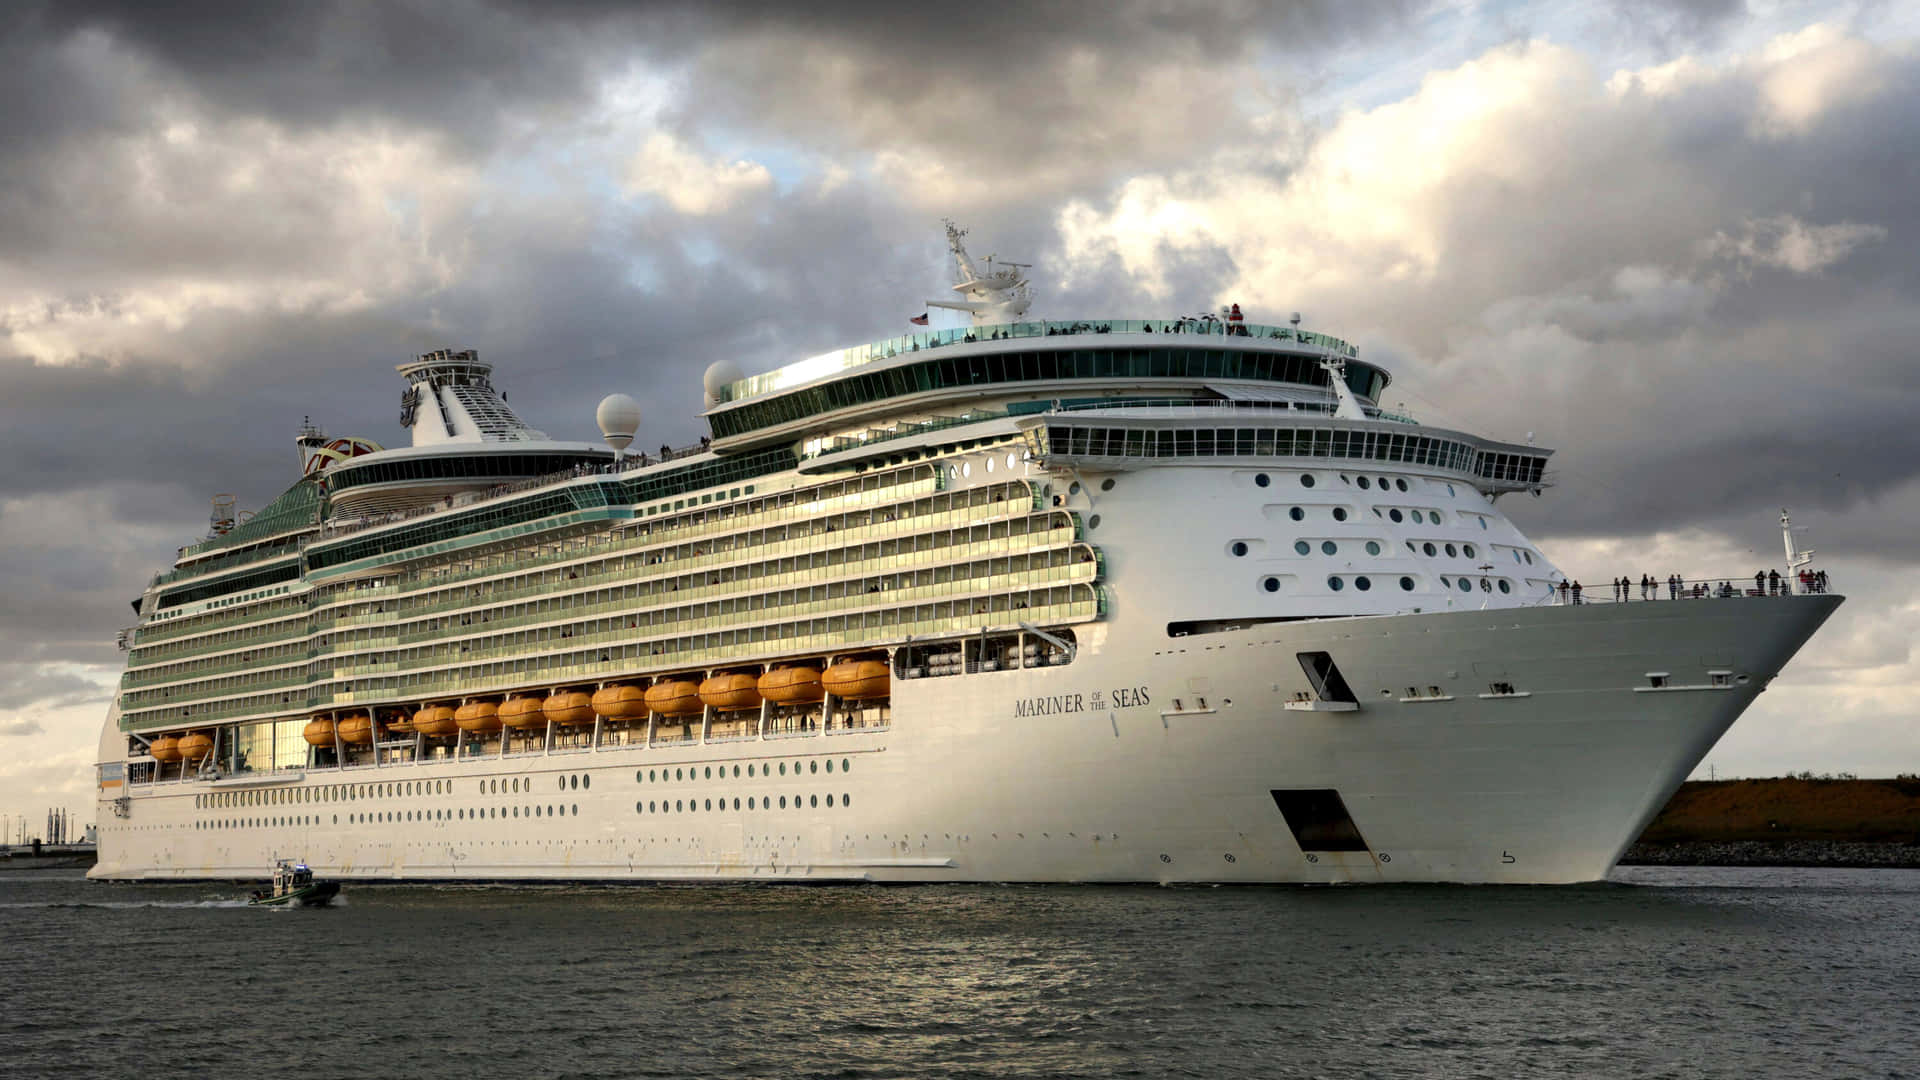 Take a Vacation of a Lifetime on a Beautiful Cruise Ship